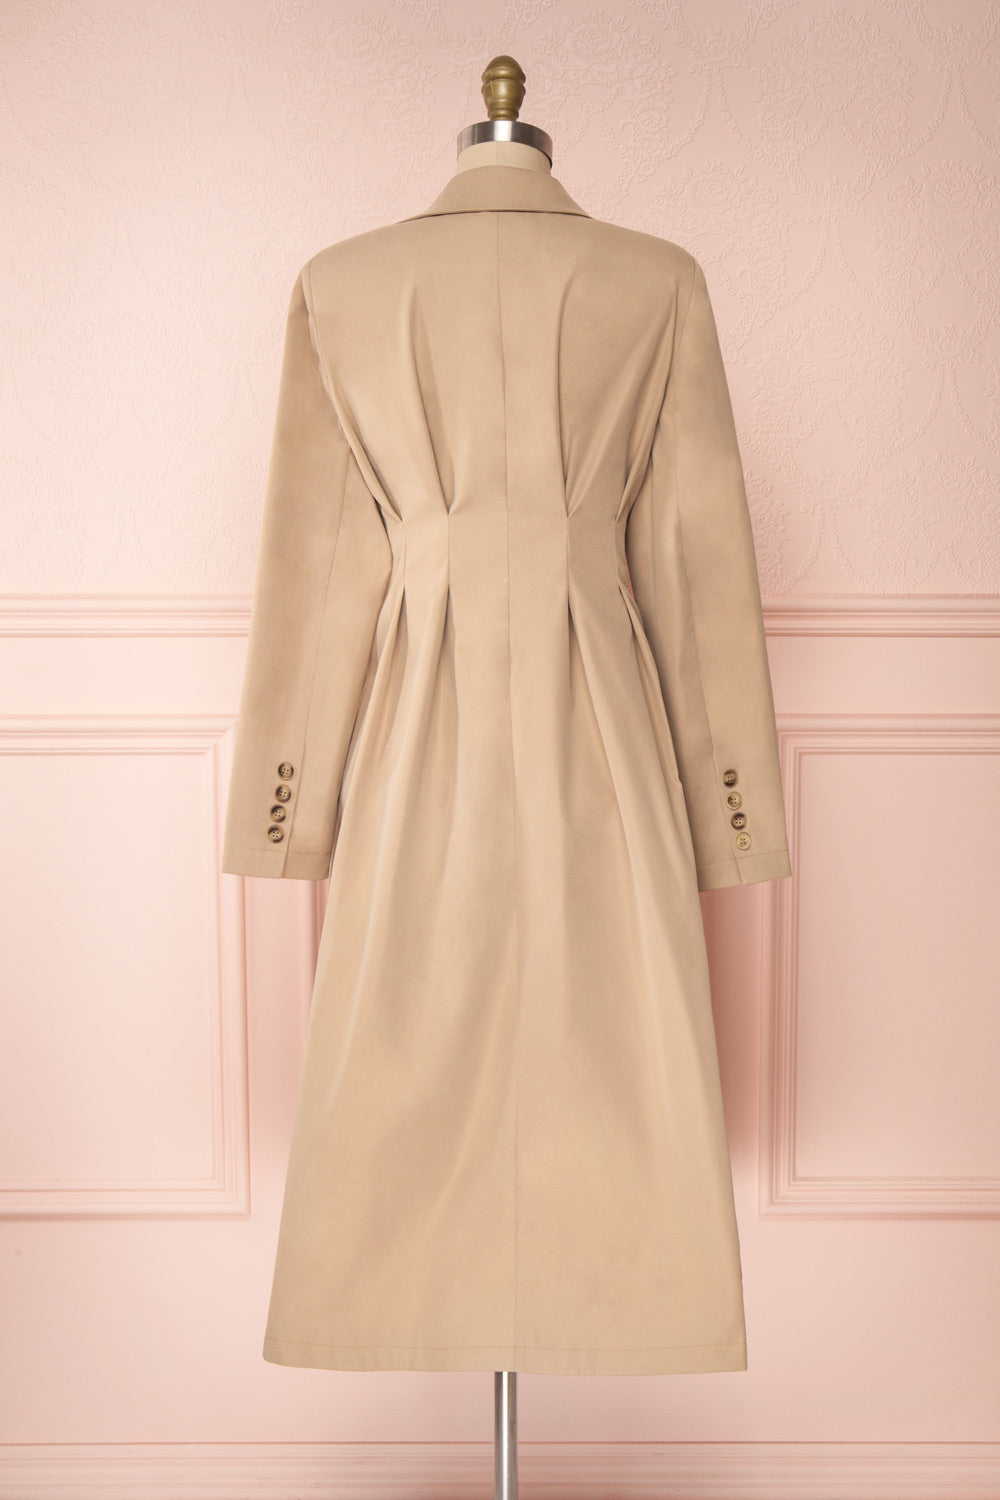 Maribelle Beige Long Sleeved Trench Coat | Boutique 1861 back view